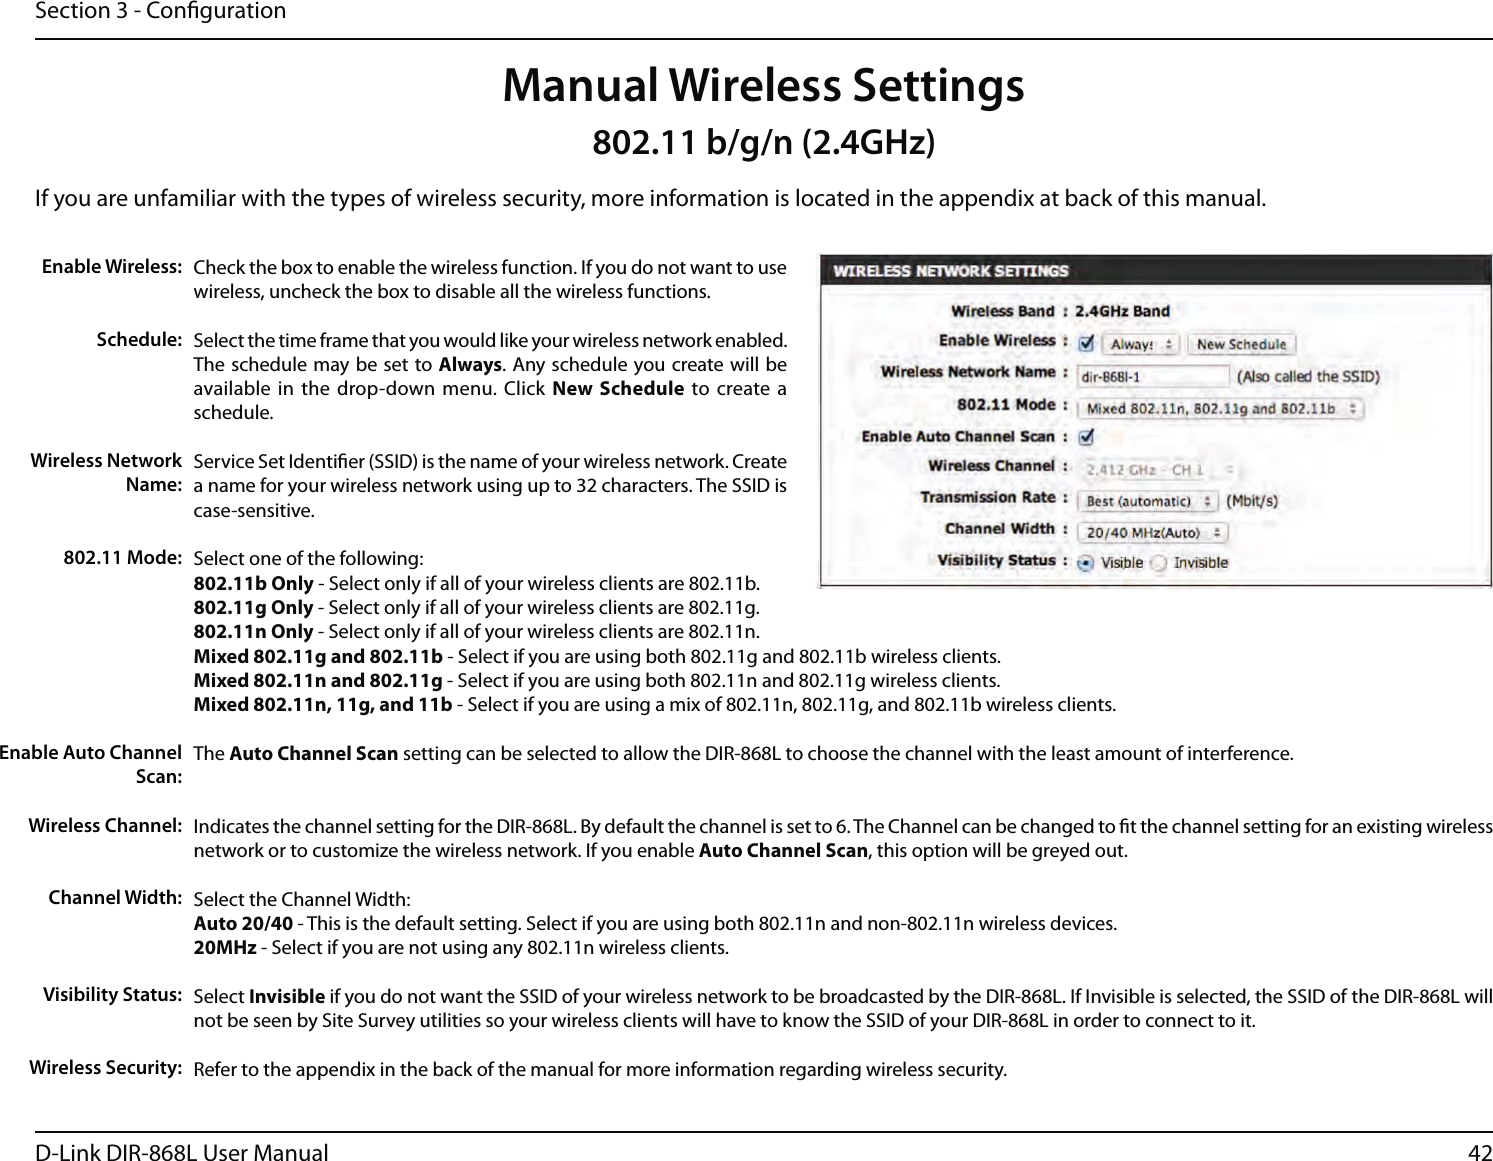 42D-Link DIR-868L User ManualSection 3 - CongurationCheck the box to enable the wireless function. If you do not want to use wireless, uncheck the box to disable all the wireless functions.Select the time frame that you would like your wireless network enabled. The schedule may be set to Always. Any schedule you create will be available in the drop-down menu. Click New Schedule to create a schedule.Service Set Identier (SSID) is the name of your wireless network. Create a name for your wireless network using up to 32 characters. The SSID is case-sensitive.Select one of the following:802.11b Only - Select only if all of your wireless clients are 802.11b.802.11g Only - Select only if all of your wireless clients are 802.11g.802.11n Only - Select only if all of your wireless clients are 802.11n.Mixed 802.11g and 802.11b - Select if you are using both 802.11g and 802.11b wireless clients.Mixed 802.11n and 802.11g - Select if you are using both 802.11n and 802.11g wireless clients.Mixed 802.11n, 11g, and 11b - Select if you are using a mix of 802.11n, 802.11g, and 802.11b wireless clients.The Auto Channel Scan setting can be selected to allow the DIR-868L to choose the channel with the least amount of interference.Indicates the channel setting for the DIR-868L. By default the channel is set to 6. The Channel can be changed to t the channel setting for an existing wireless network or to customize the wireless network. If you enable Auto Channel Scan, this option will be greyed out.Select the Channel Width:Auto 20/40 - This is the default setting. Select if you are using both 802.11n and non-802.11n wireless devices.20MHz - Select if you are not using any 802.11n wireless clients.Select Invisible if you do not want the SSID of your wireless network to be broadcasted by the DIR-868L. If Invisible is selected, the SSID of the DIR-868L will not be seen by Site Survey utilities so your wireless clients will have to know the SSID of your DIR-868L in order to connect to it.Refer to the appendix in the back of the manual for more information regarding wireless security.Enable Wireless:Schedule:Wireless Network Name:802.11 Mode:Enable Auto Channel Scan:Wireless Channel:Manual Wireless SettingsChannel Width:Visibility Status:Wireless Security:802.11 b/g/n (2.4GHz)If you are unfamiliar with the types of wireless security, more information is located in the appendix at back of this manual.